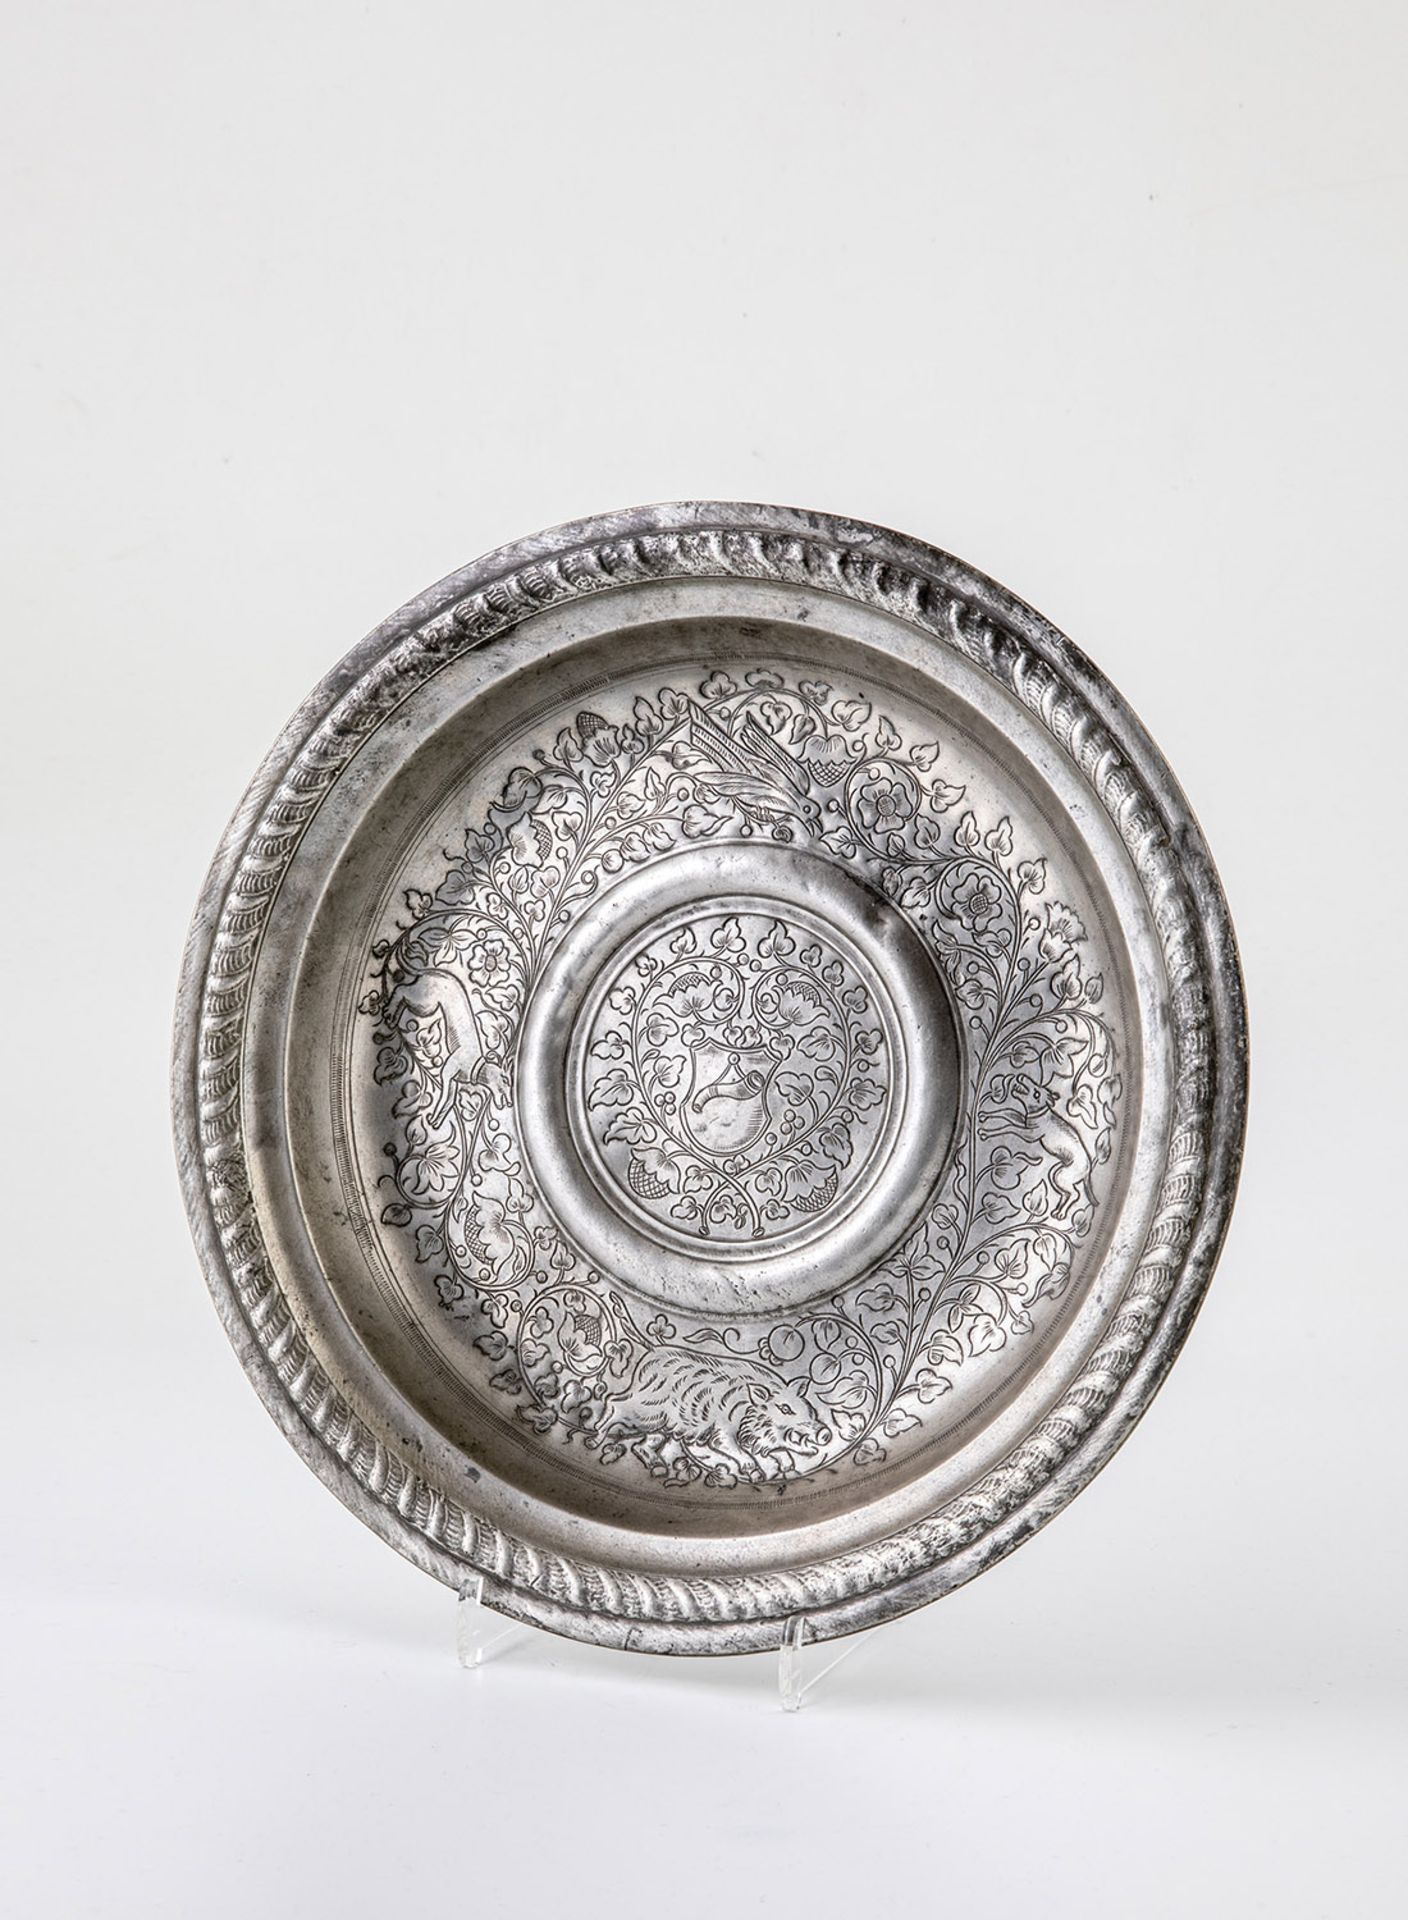 Pewter plate with hunting motifs